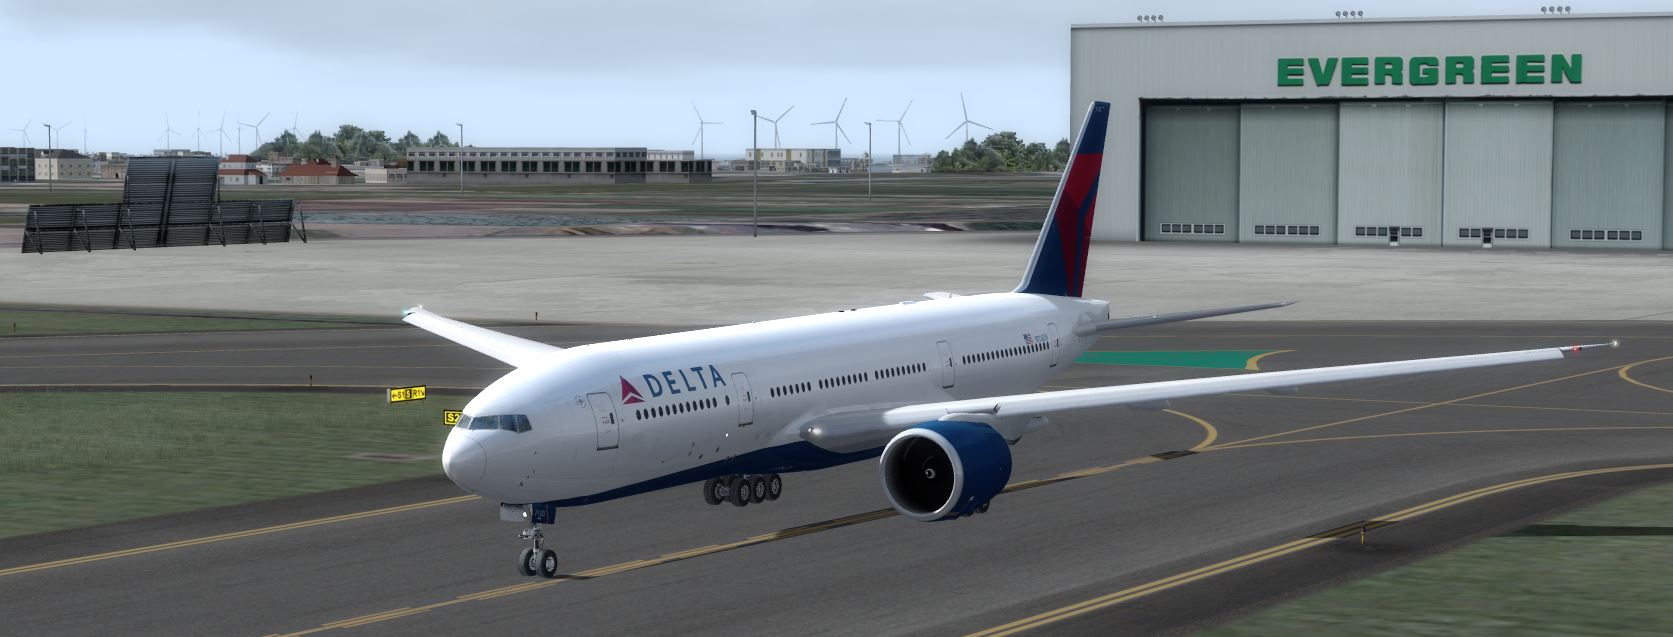 B777-200 Delta Airlines Standard Livery-8786 